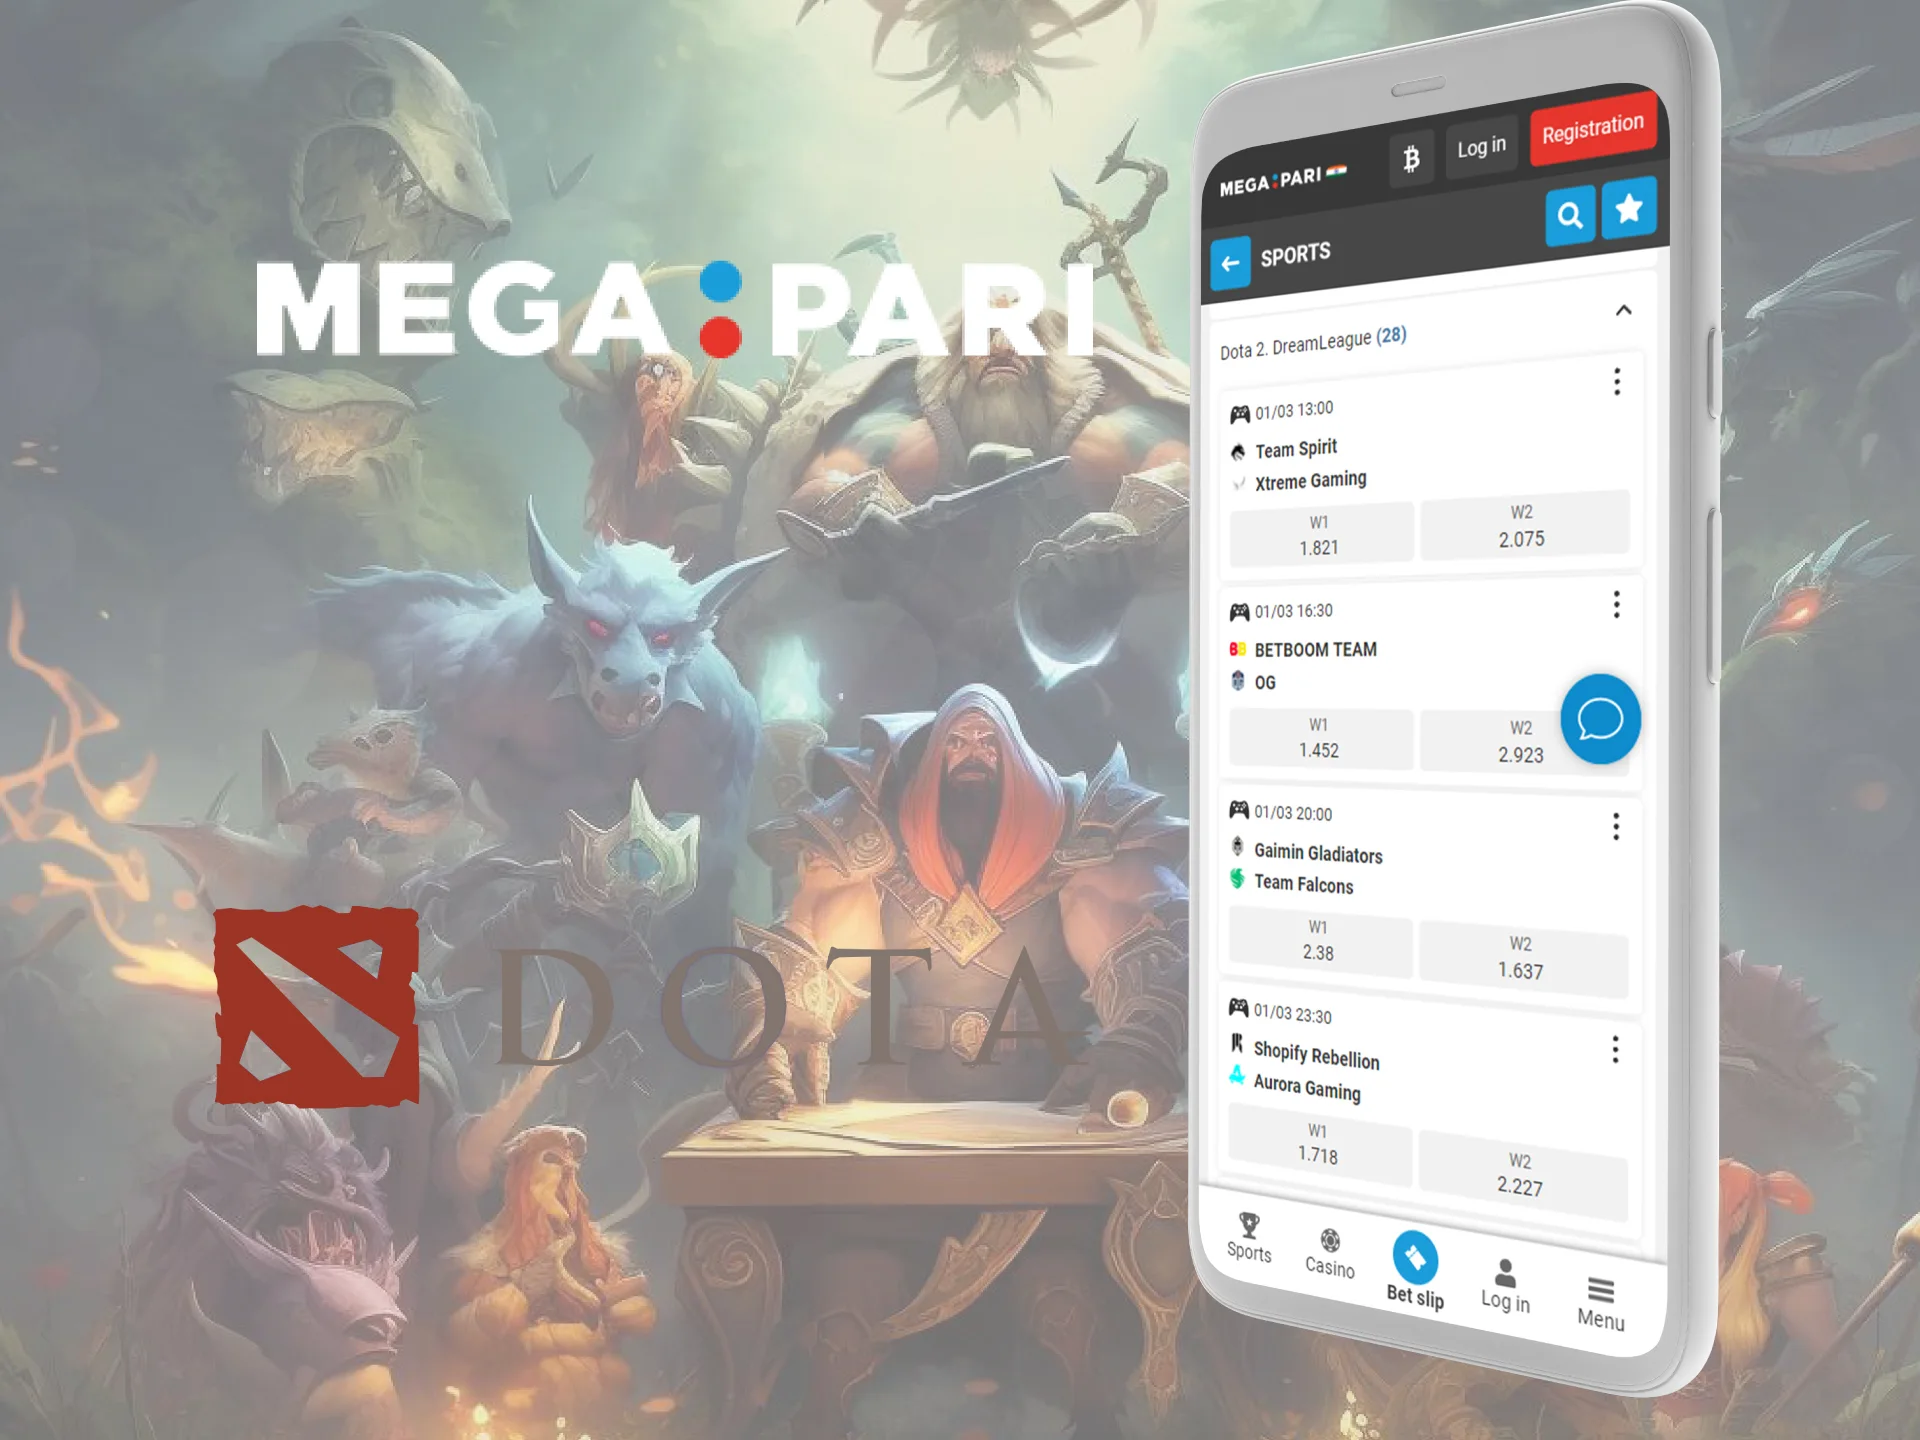 The Megapari app allows you to quickly place bets on sports and cyber sports disciplines.